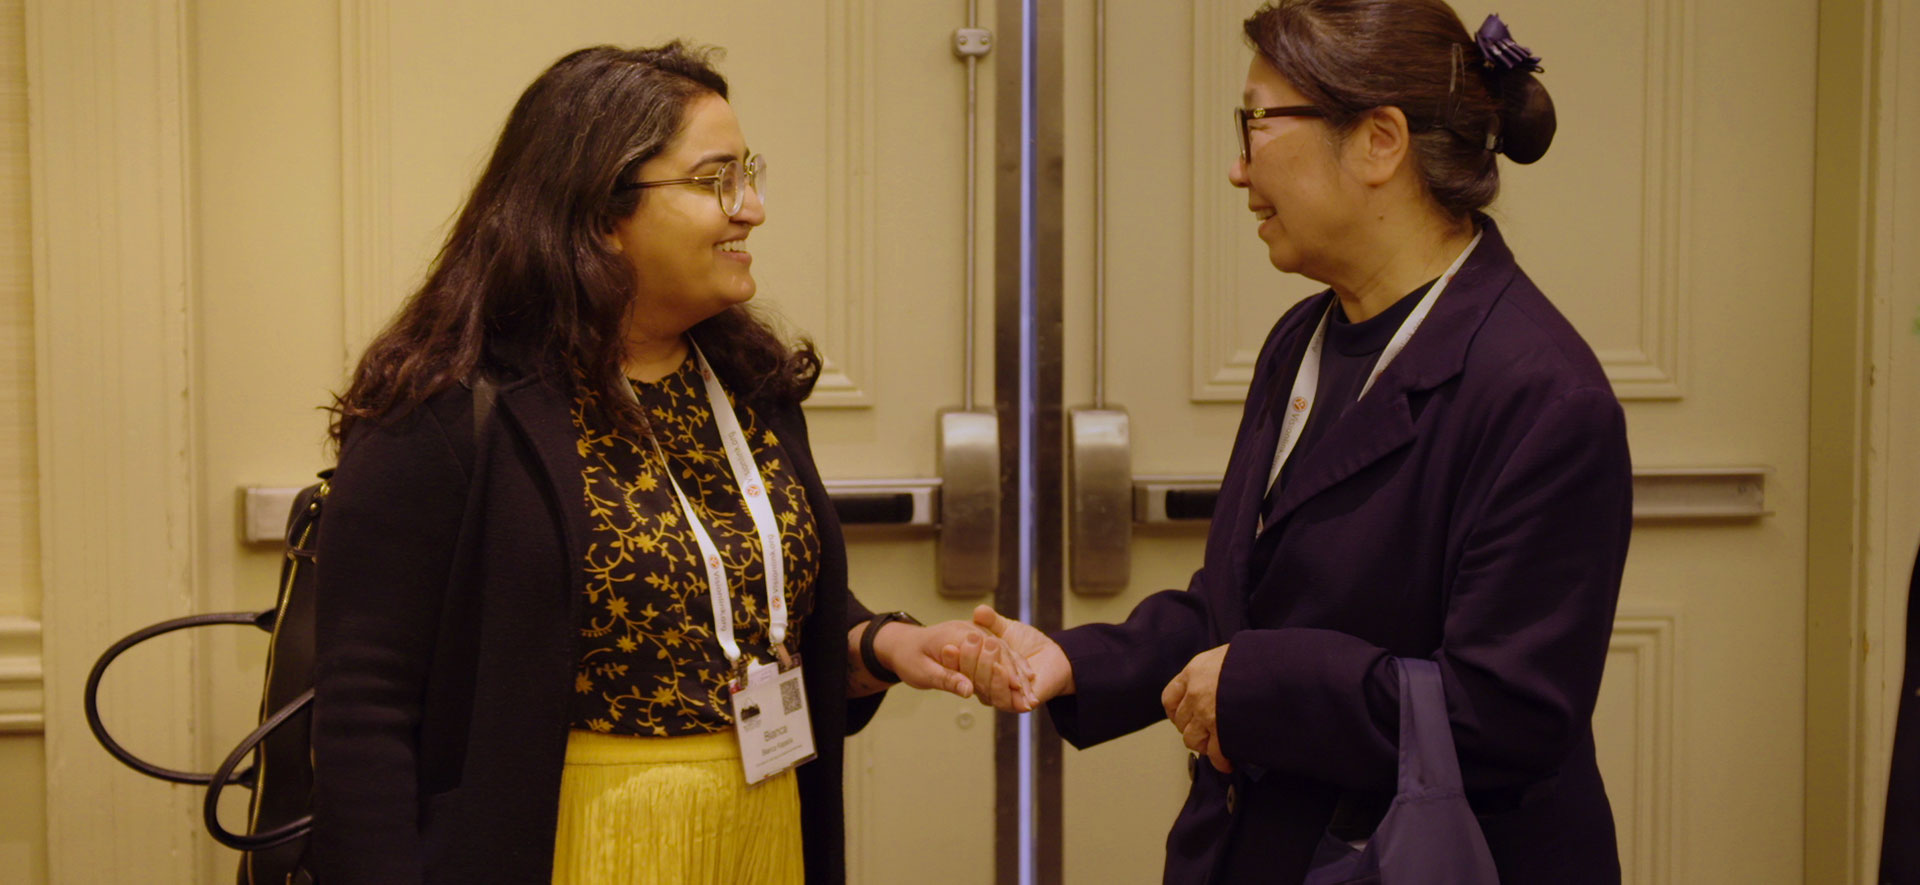 From Crisis to Collaboration: Connecting at the National VOAD Conference